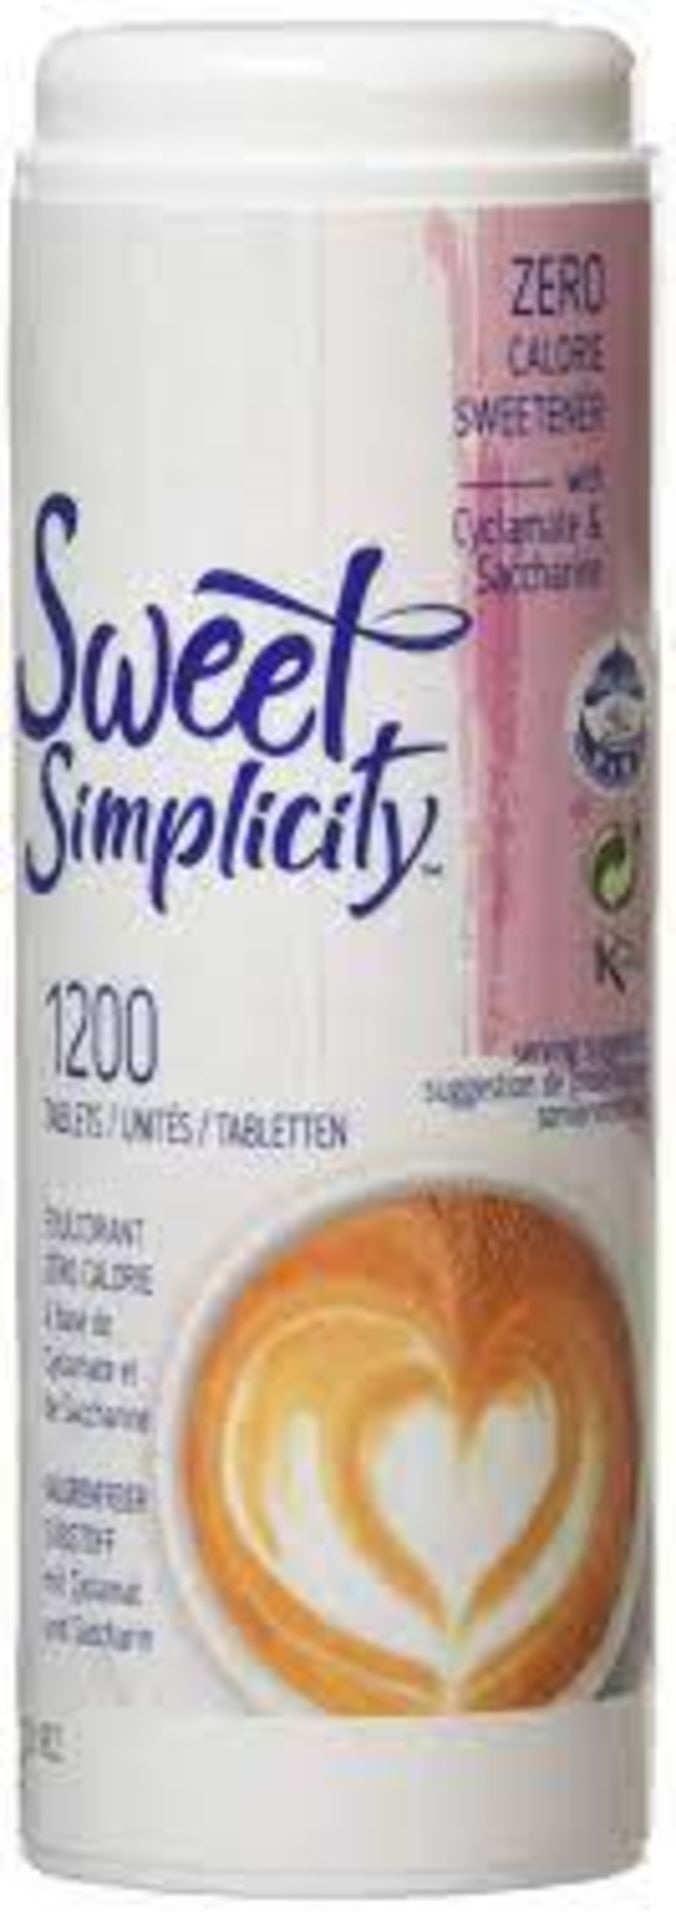 RRP £749 (Approx Count 100) (F11) spW60x7279F 9 x SWEET SIMPLICITY - Zero Calorie Sweetener |